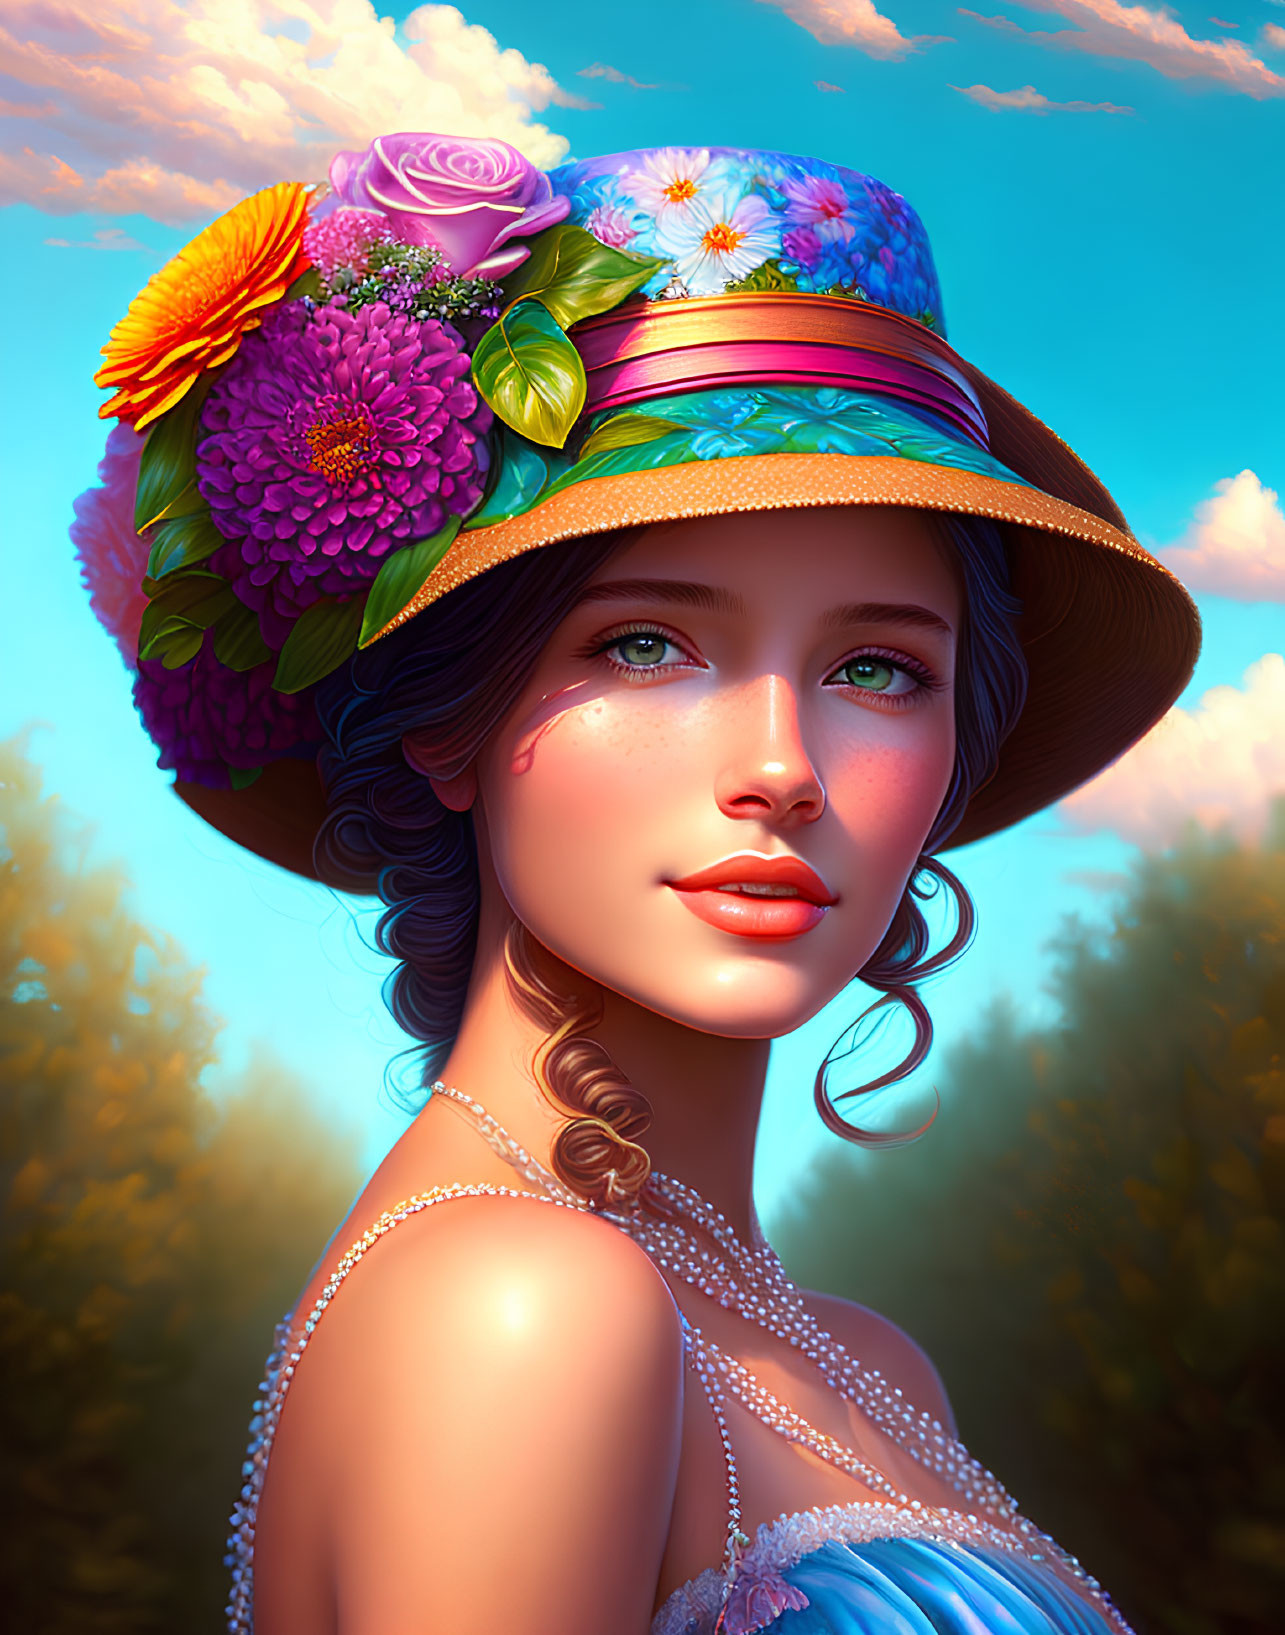 Colorful digital artwork of a woman in a floral hat and blue dress with blue eyes, set in